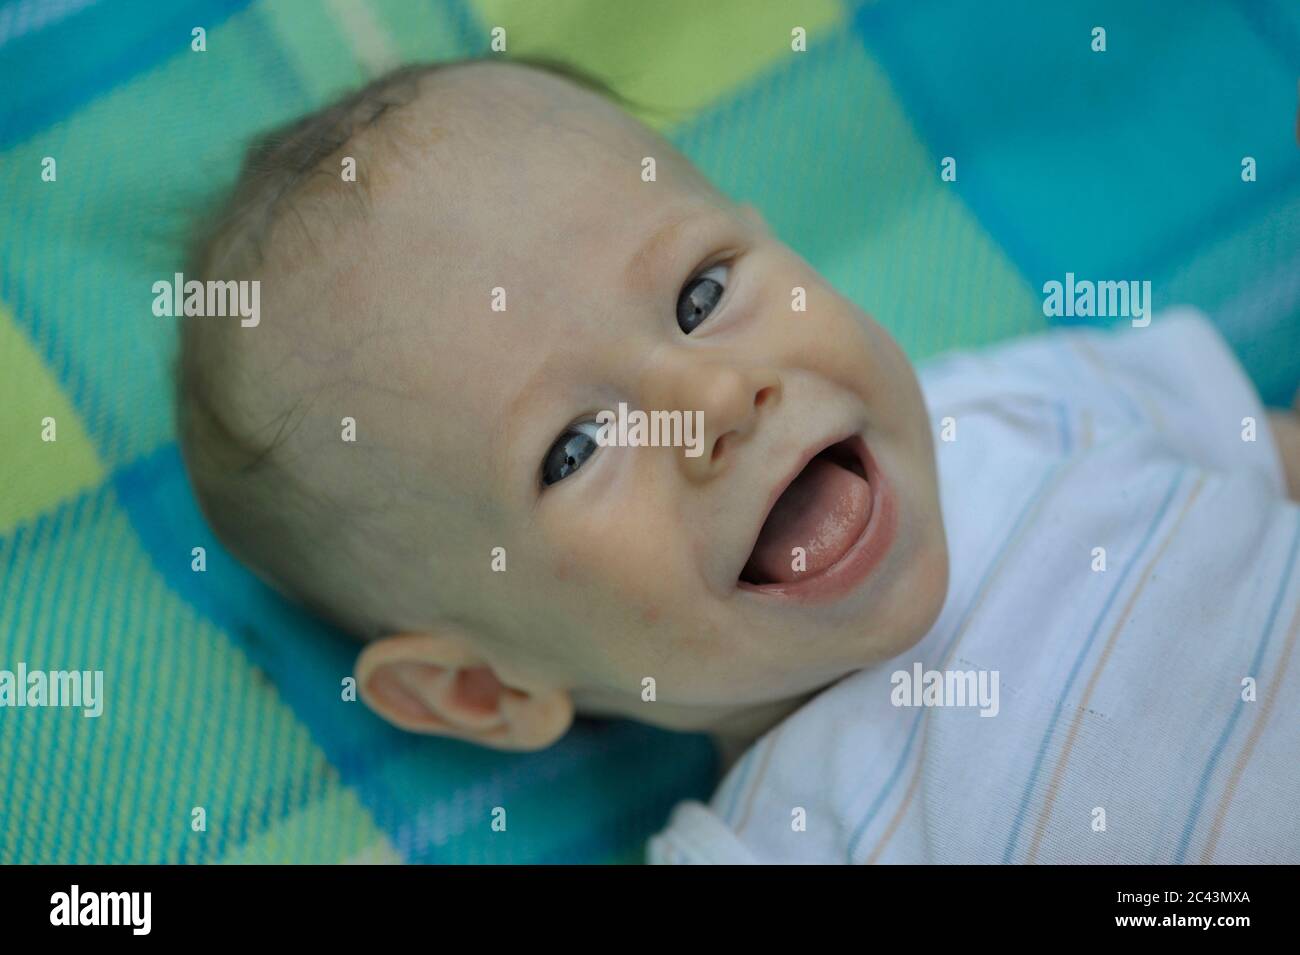 Cheerful baby is lying on a blanket Stock Photo